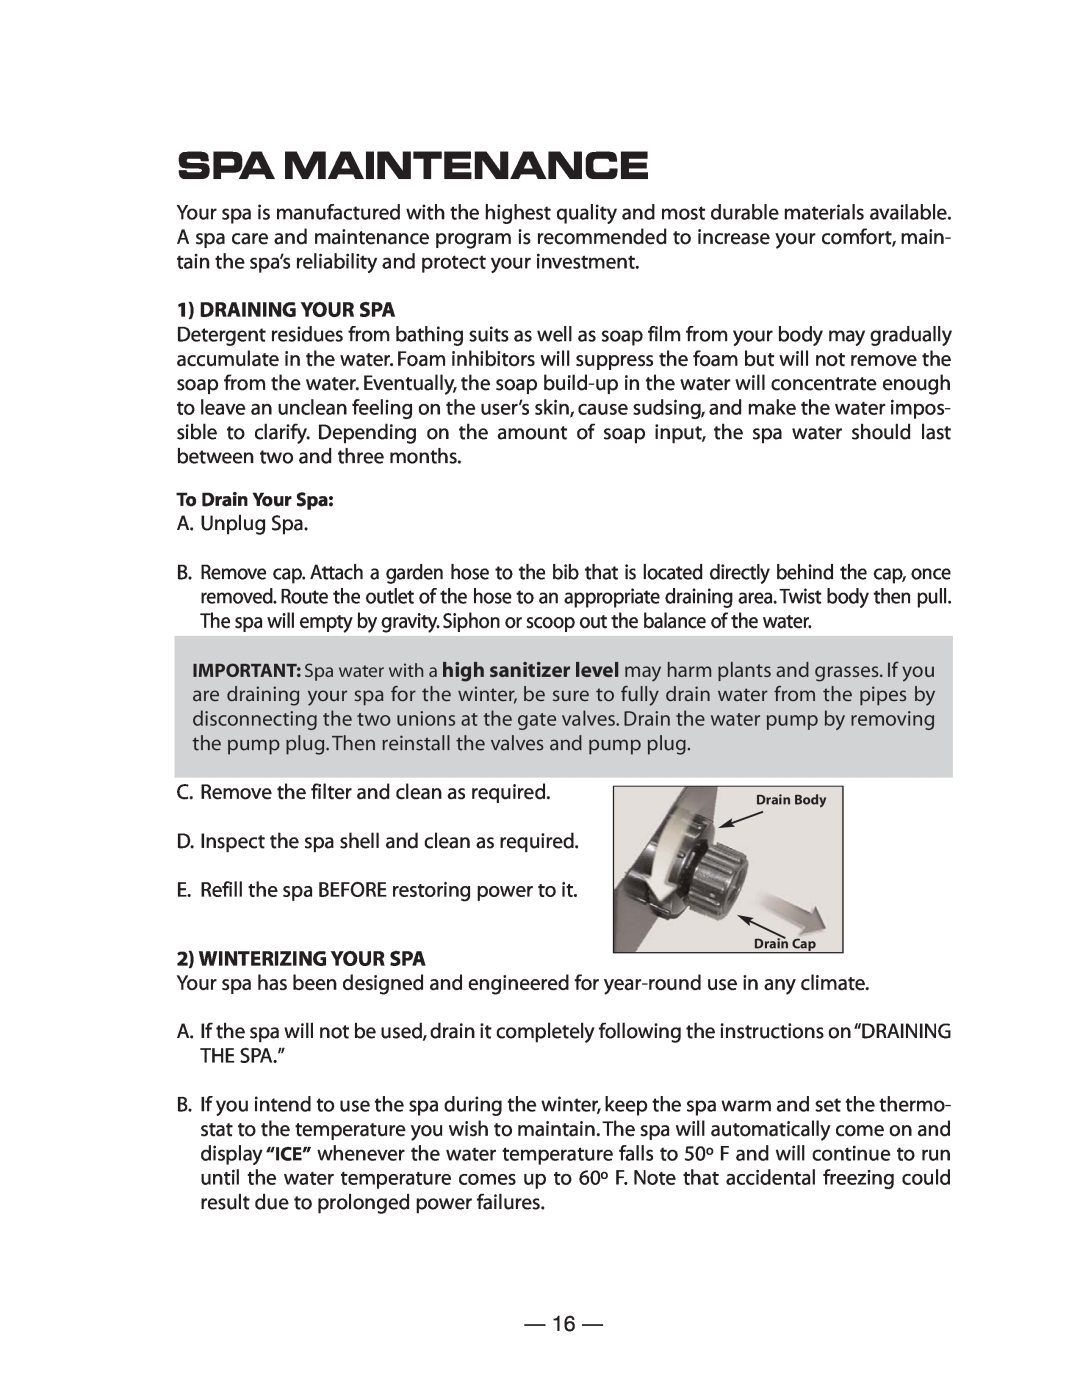 Vita Spa U -1 3 0 Spa Maintenance, Draining Your Spa, C. Remove the filter and clean as required, Winterizing Your Spa 